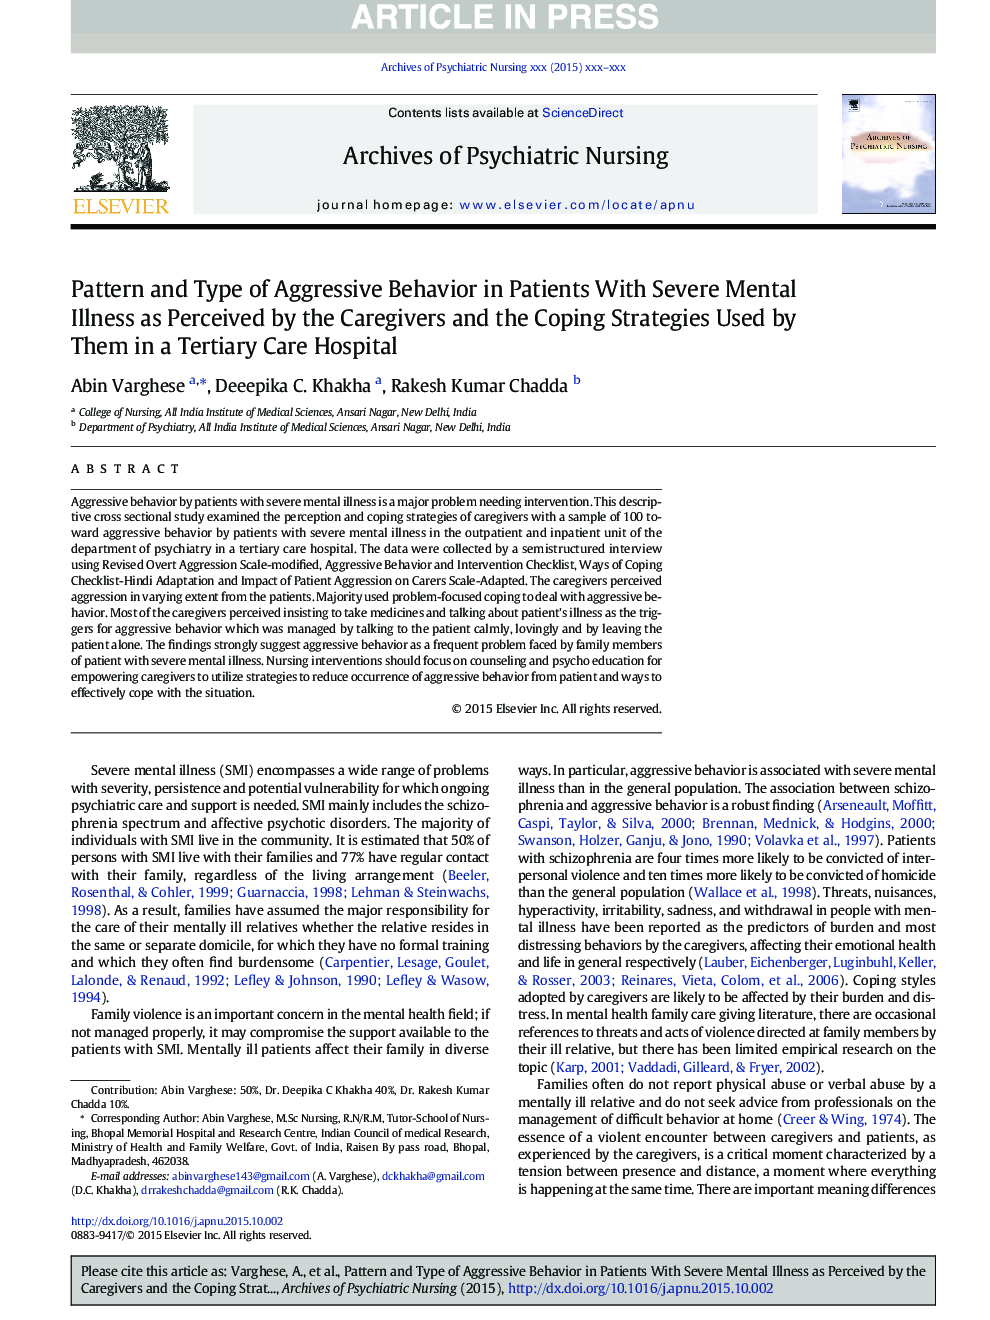 Pattern and Type of Aggressive Behavior in Patients with Severe Mental Illness as Perceived by the Caregivers and the Coping Strategies Used by Them in a Tertiary Care Hospital